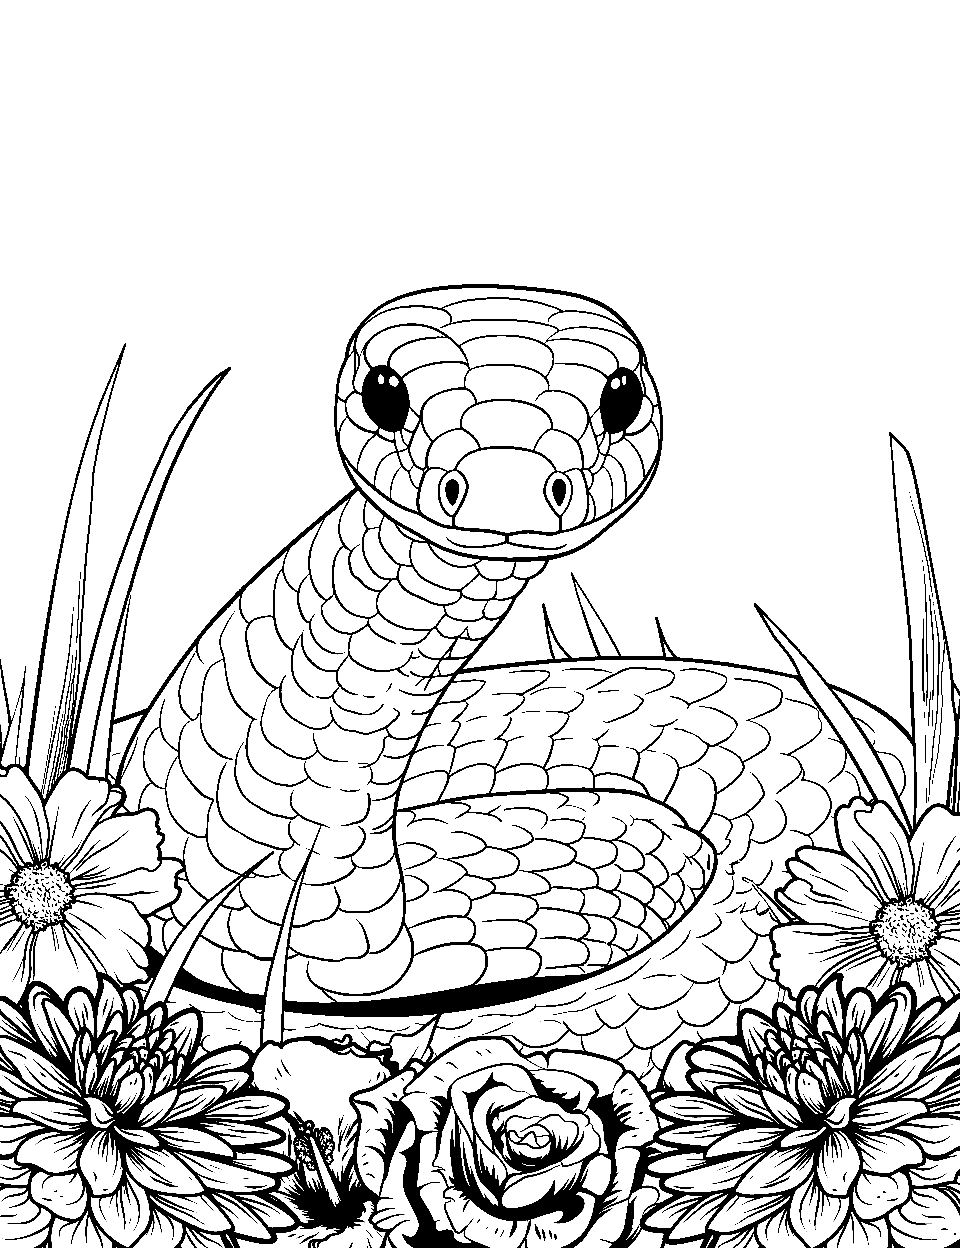 Tropical Paradise Coloring Page - A snake amidst tropical flowers.